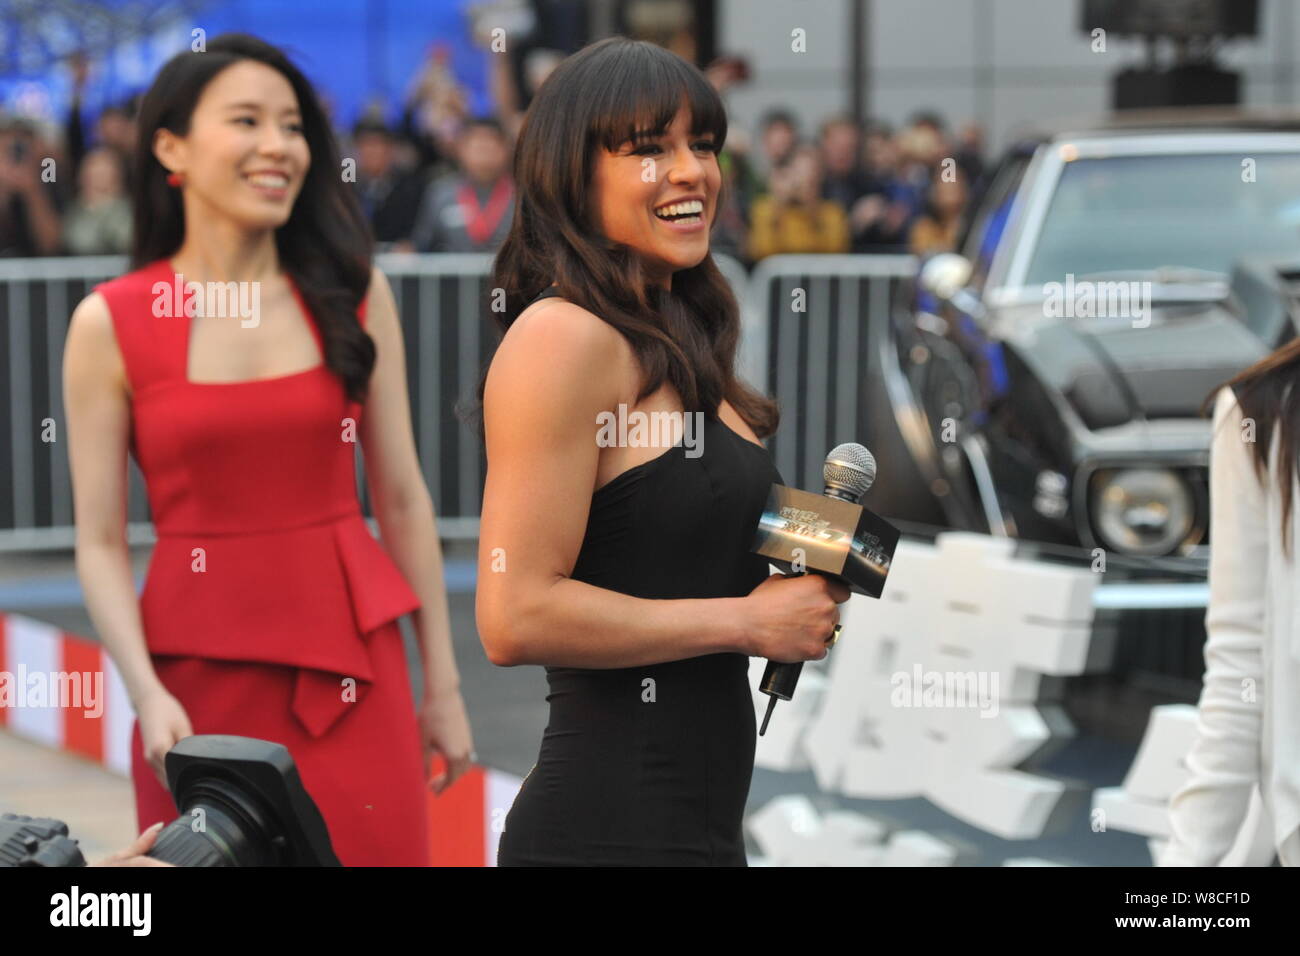 American actress Michelle Rodriguez arrives for a premiere event for her movie 'Furious 7' in Beijing, China, 26 March 2015. Stock Photo